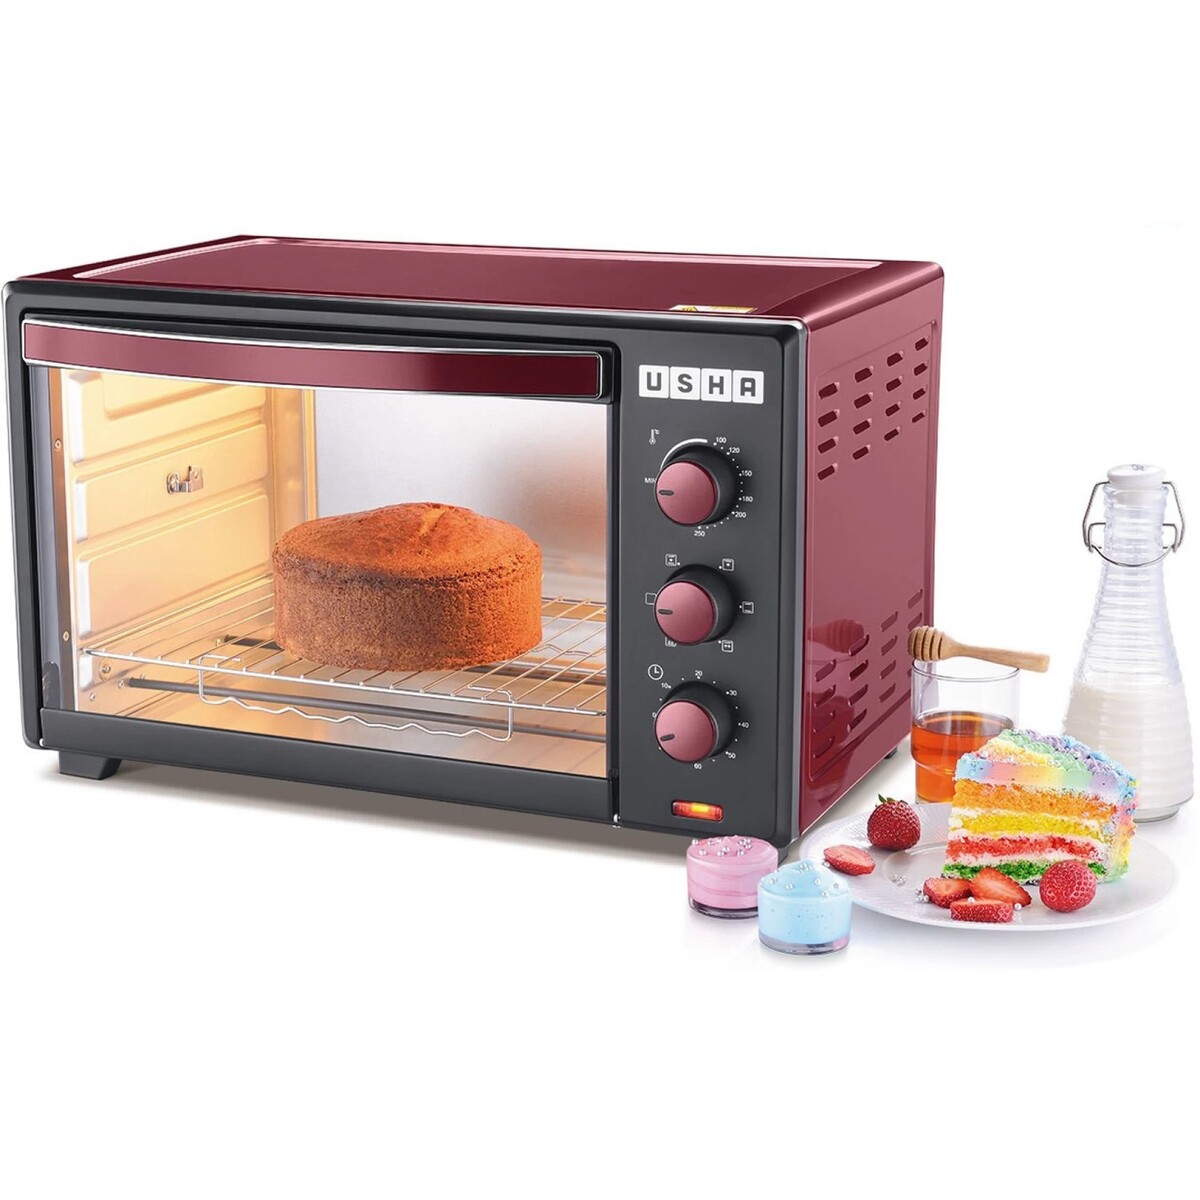 Usha 3635RC Oven Toaster Grill 35 Litre